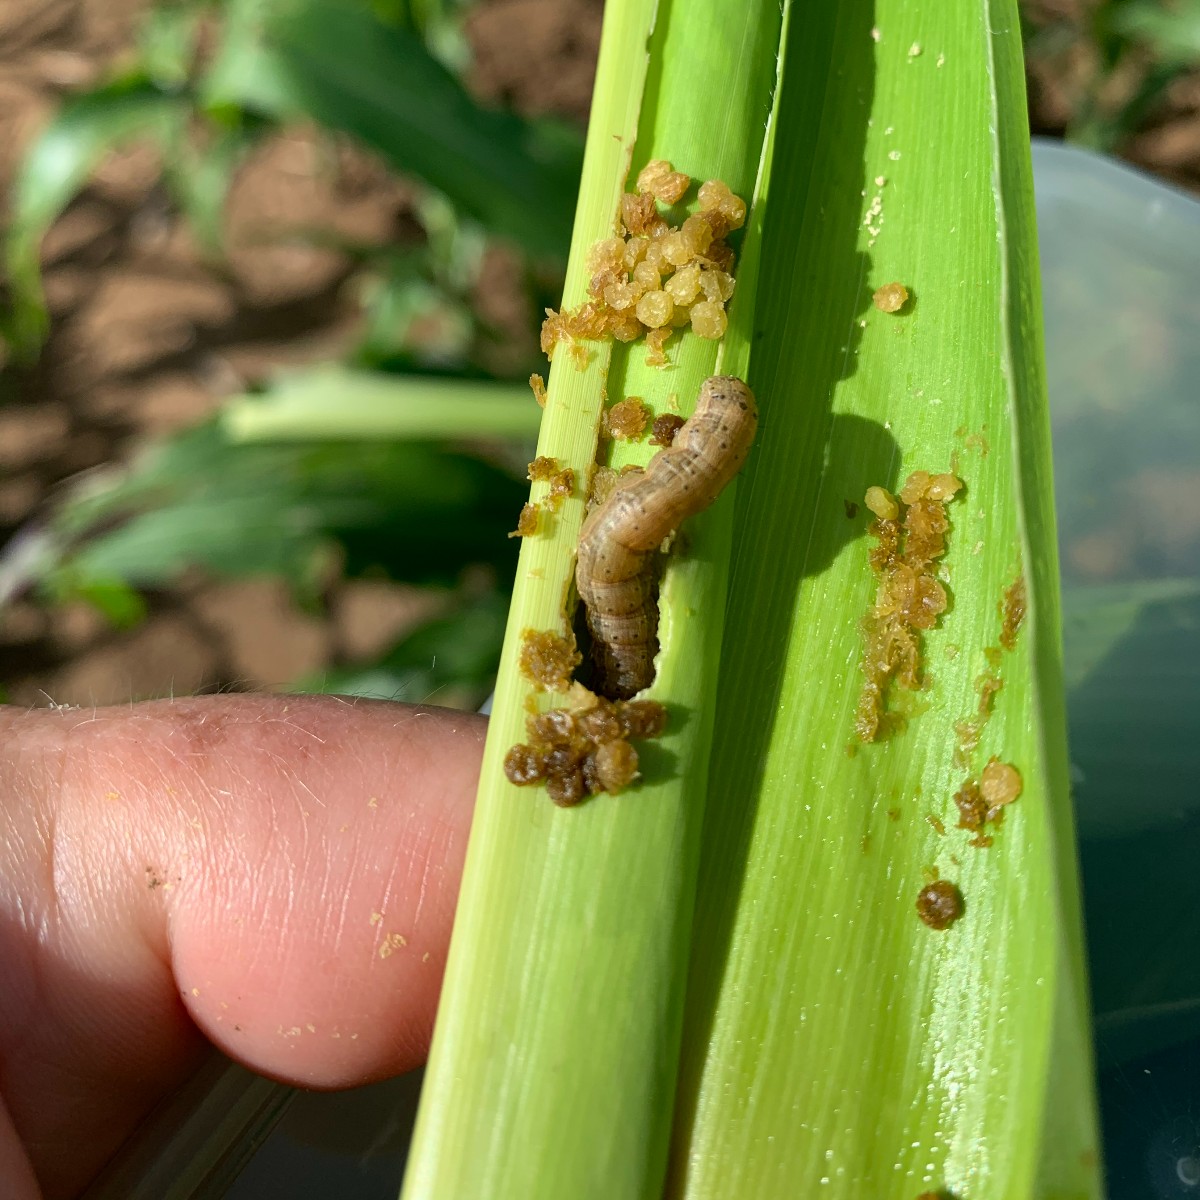 Our fall armyworm webinar is now available as a handy recording! 🐛💻

Hear principal entomologist Dr Melina Miles share valuable insights on this season's challenging FAW infestation, the latest research and sustainable solutions.

▶️ Watch: brnw.ch/21wKinO